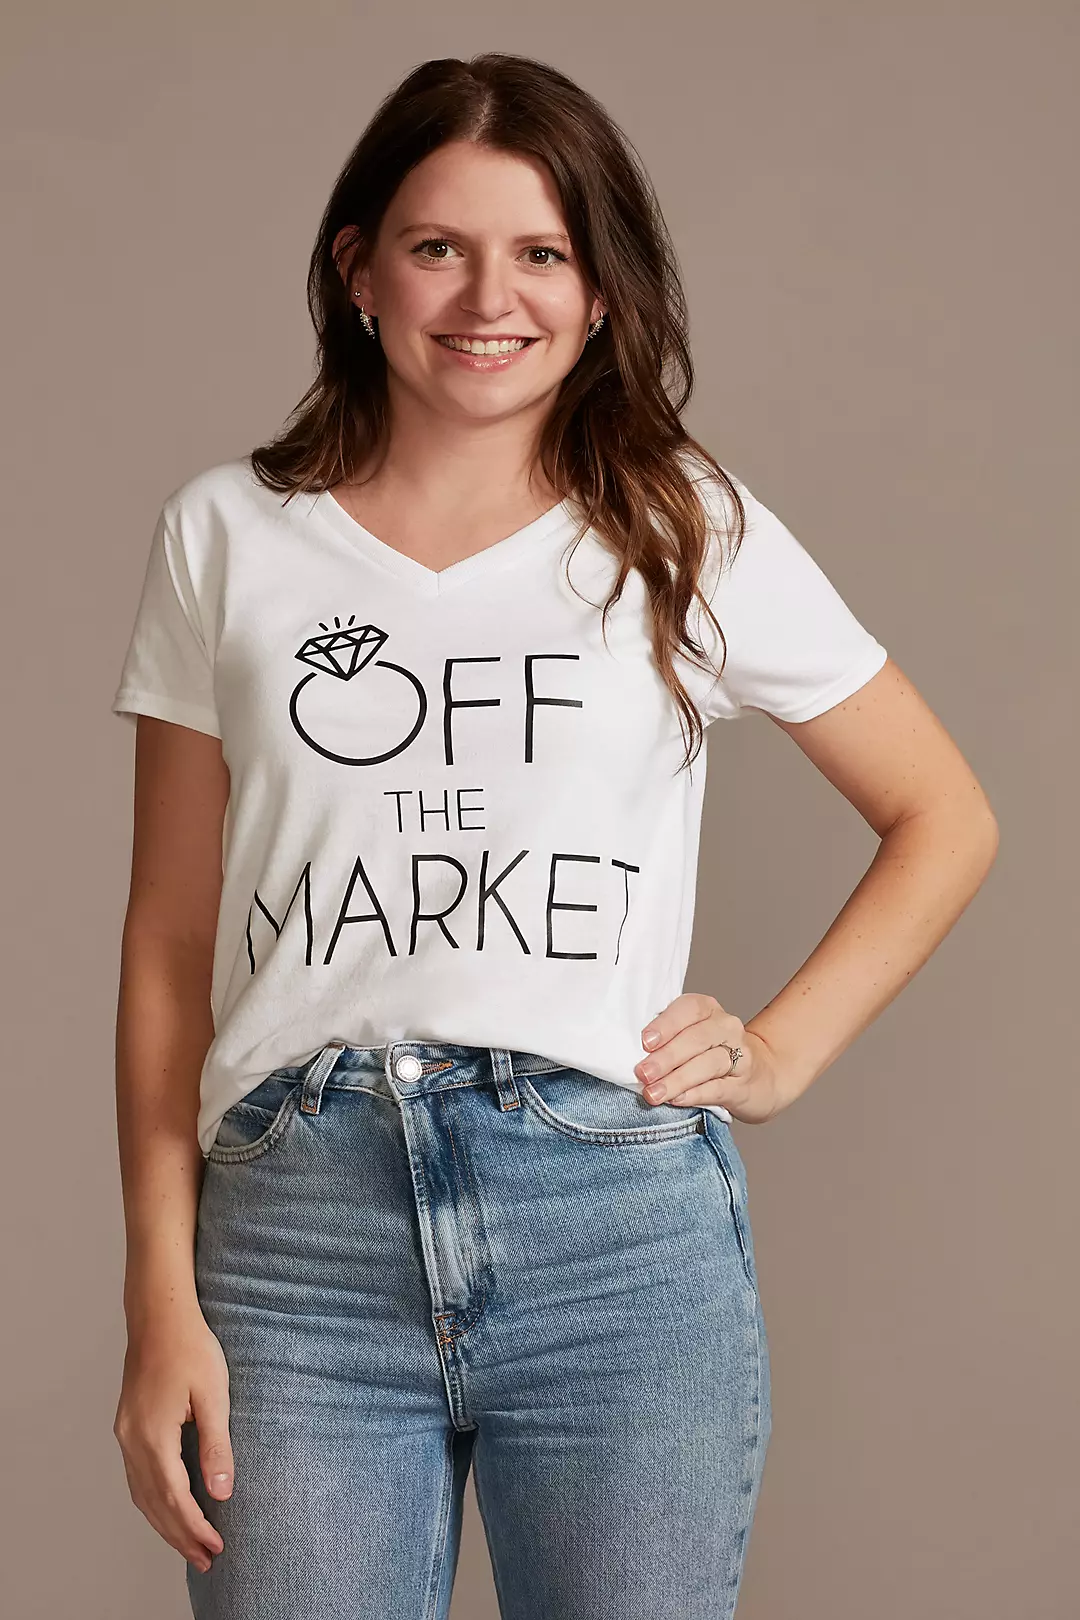 Off The Market T-Shirt Image